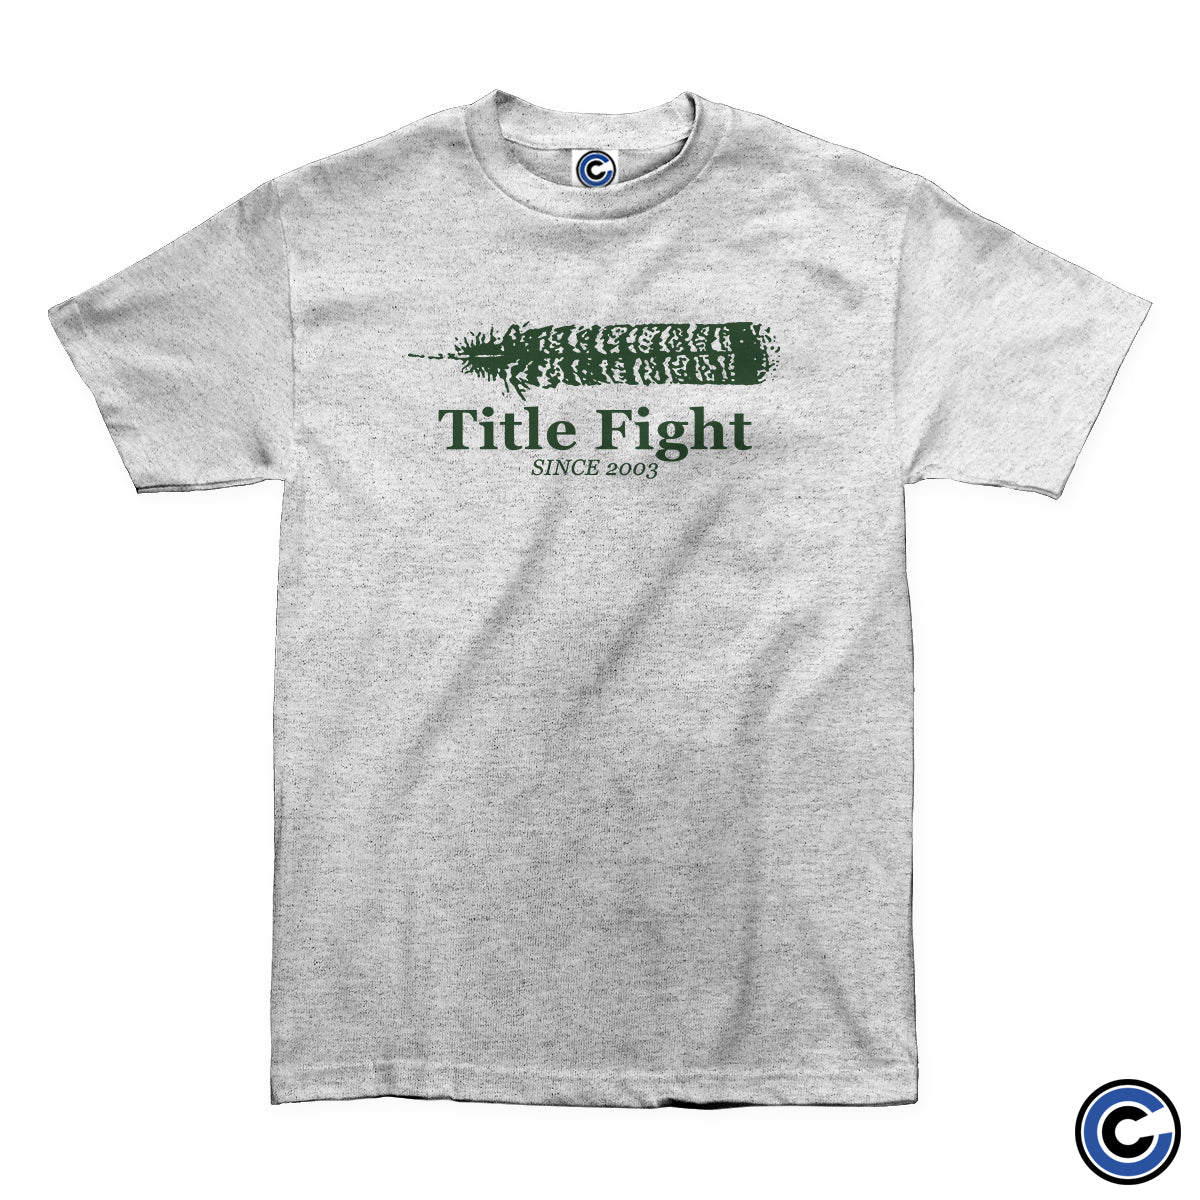 Title Fight "Feather" Shirt